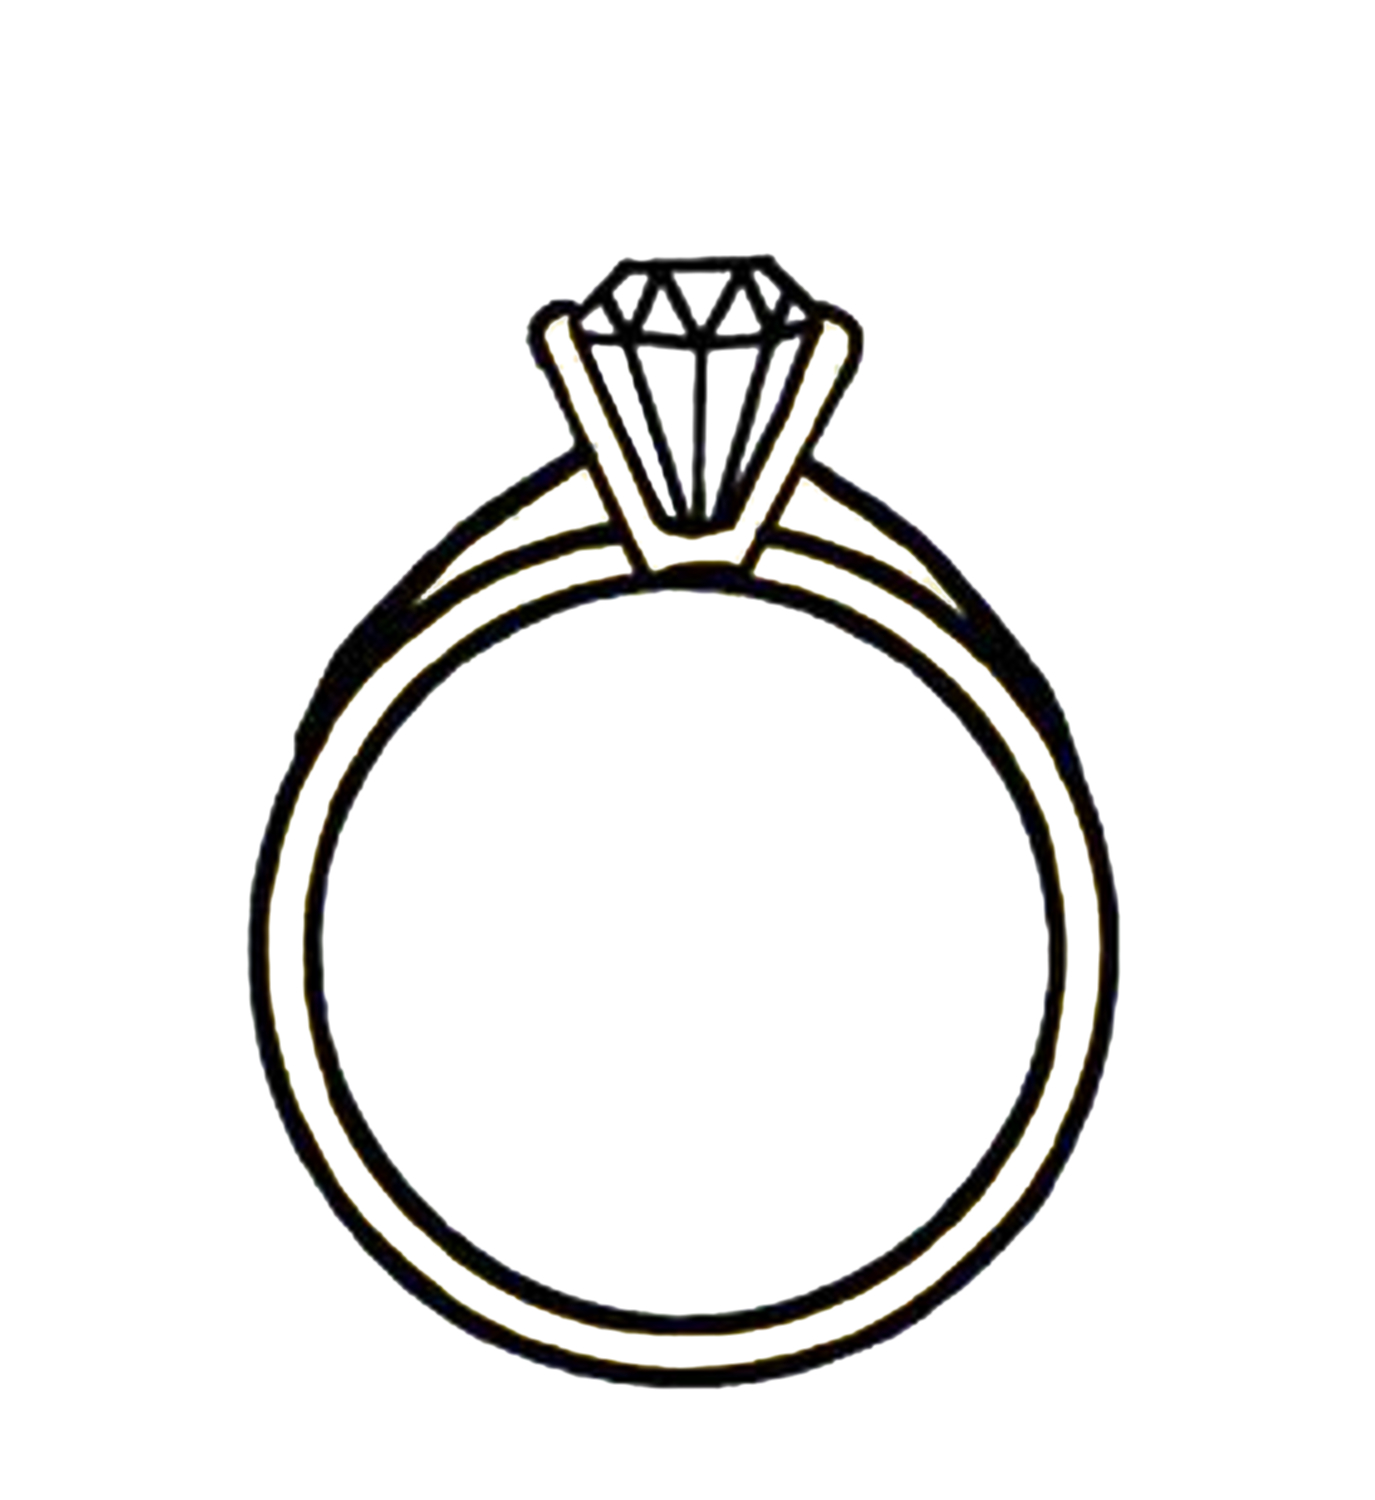 Linked Wedding Rings Clipart | Clipart library - Free Clipart Images